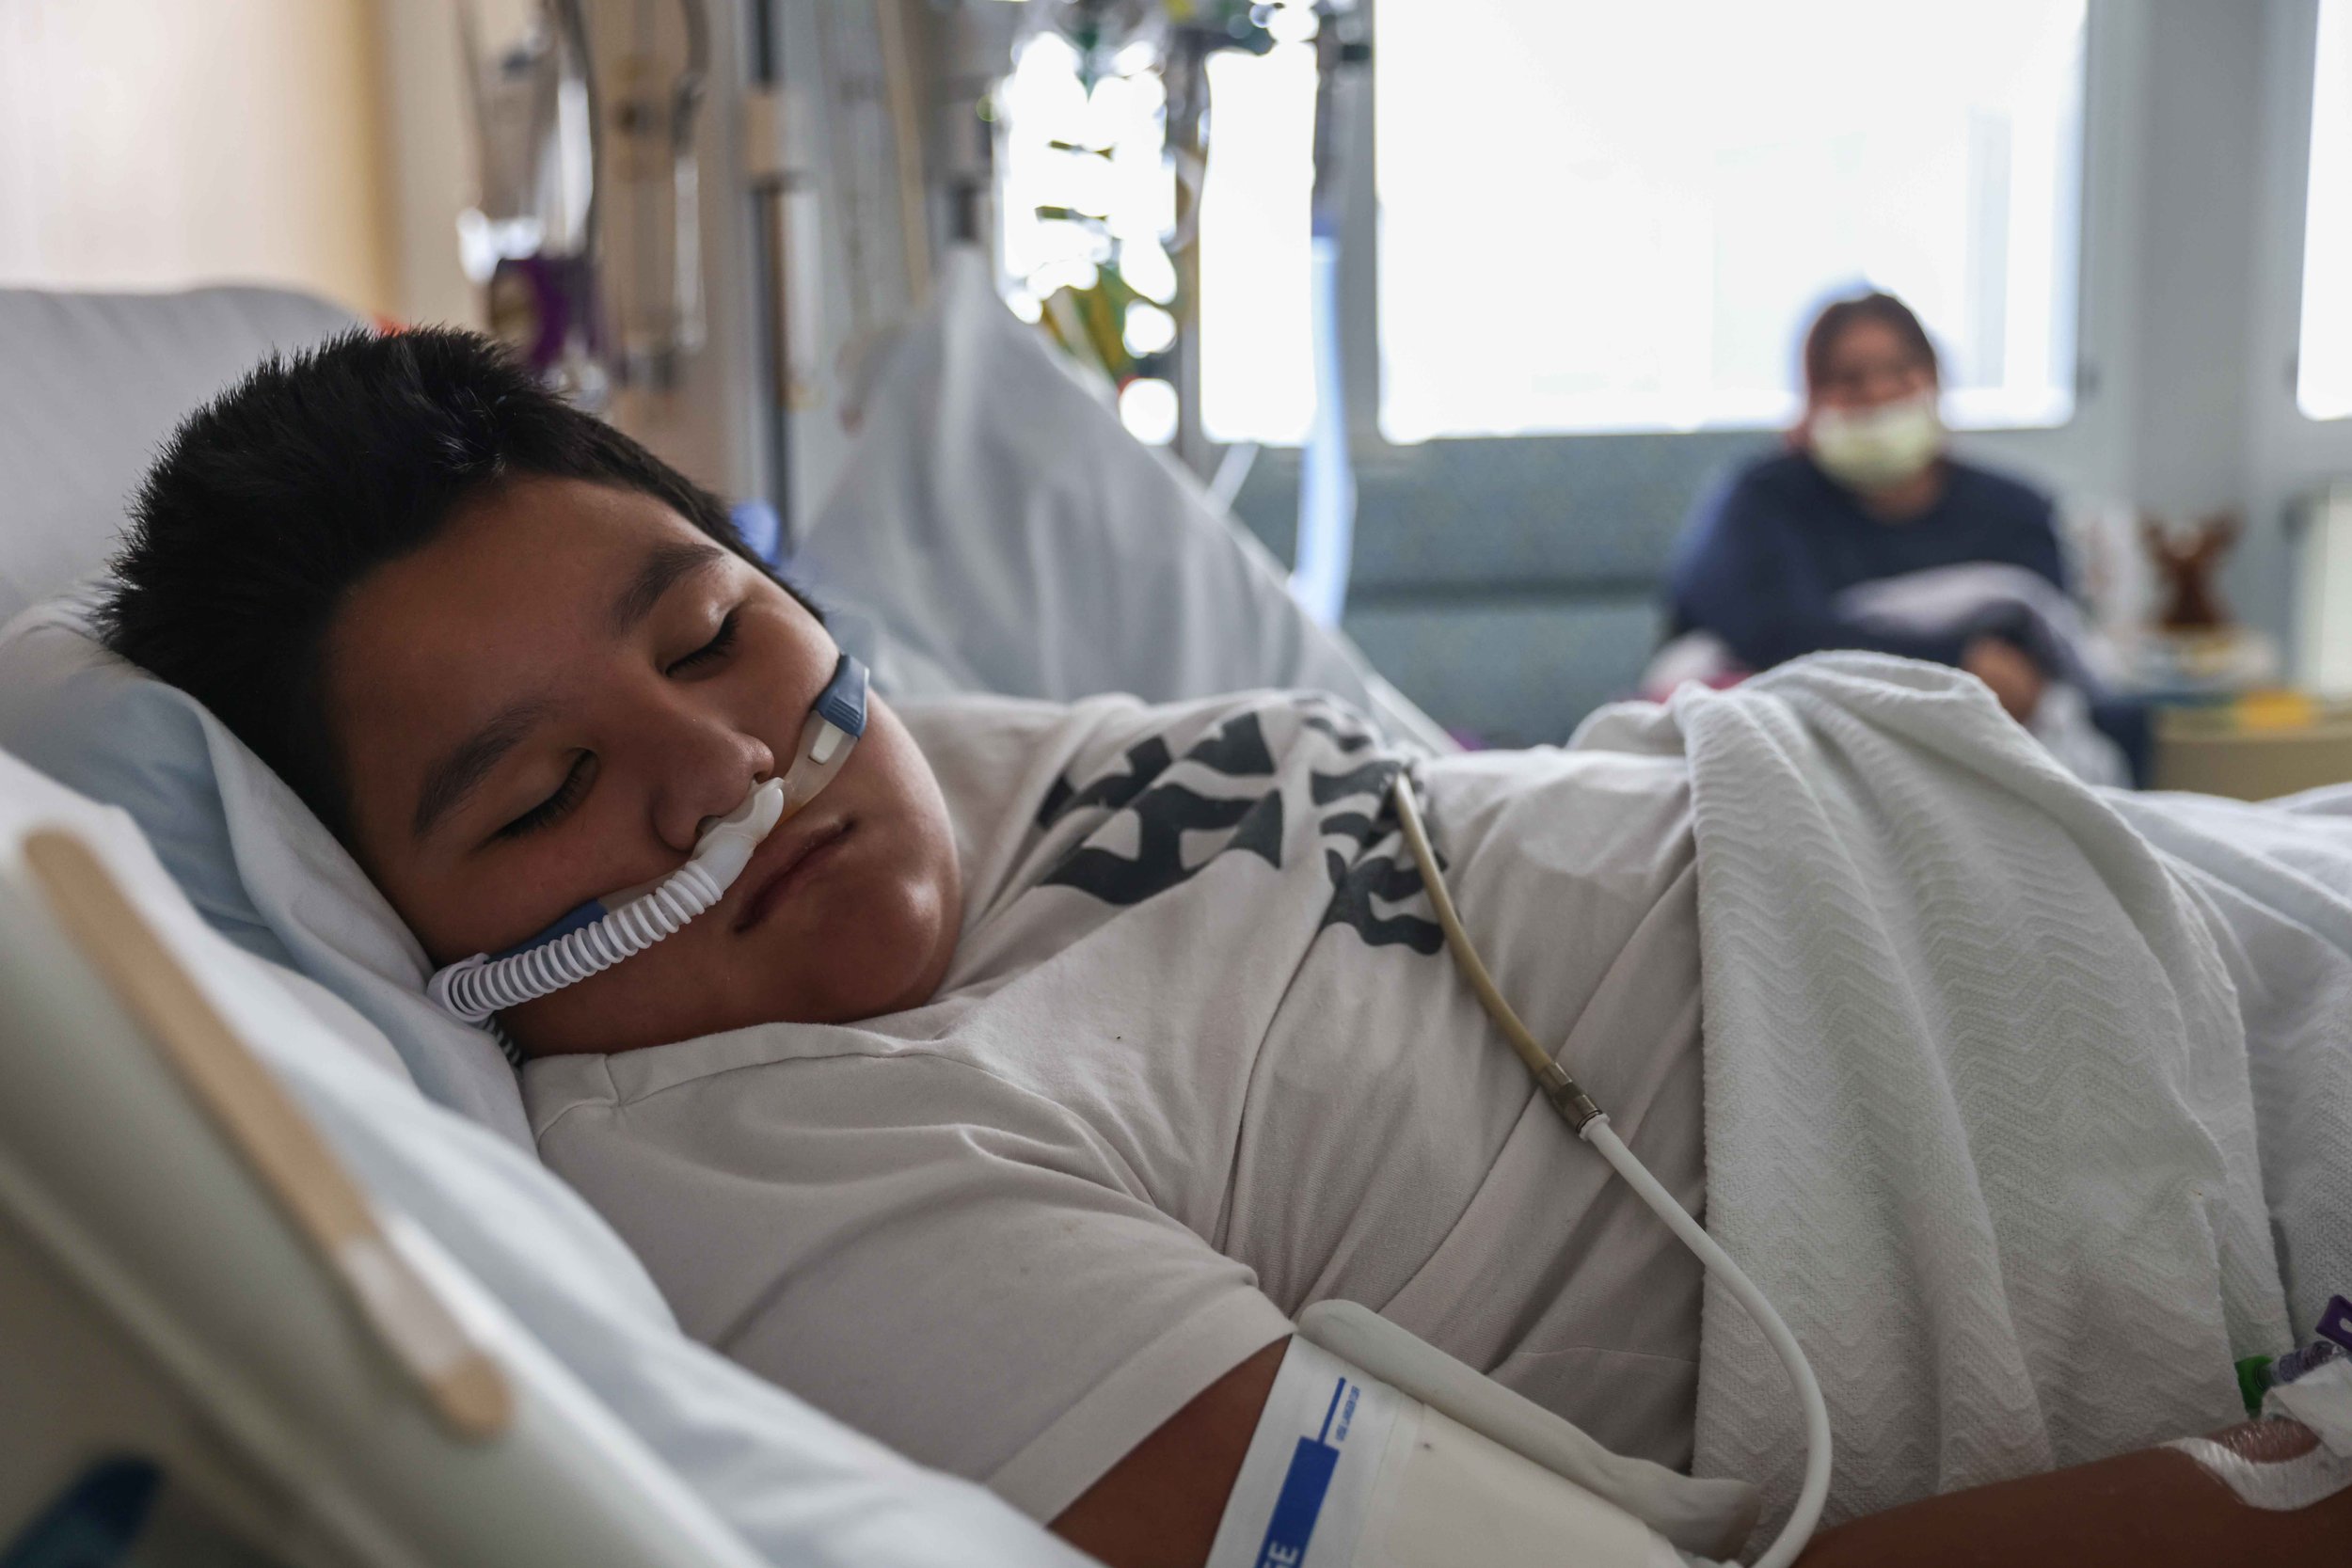  Francisco Rosales, 9, is being treated for COVID-19 in the pediatric intensive care unit at Children's Medical Center Dallas on Friday, Aug. 13, 2021. Rosales has been hospitalized since Aug. 8 when his blood oxygen level was at 62%, according to hi